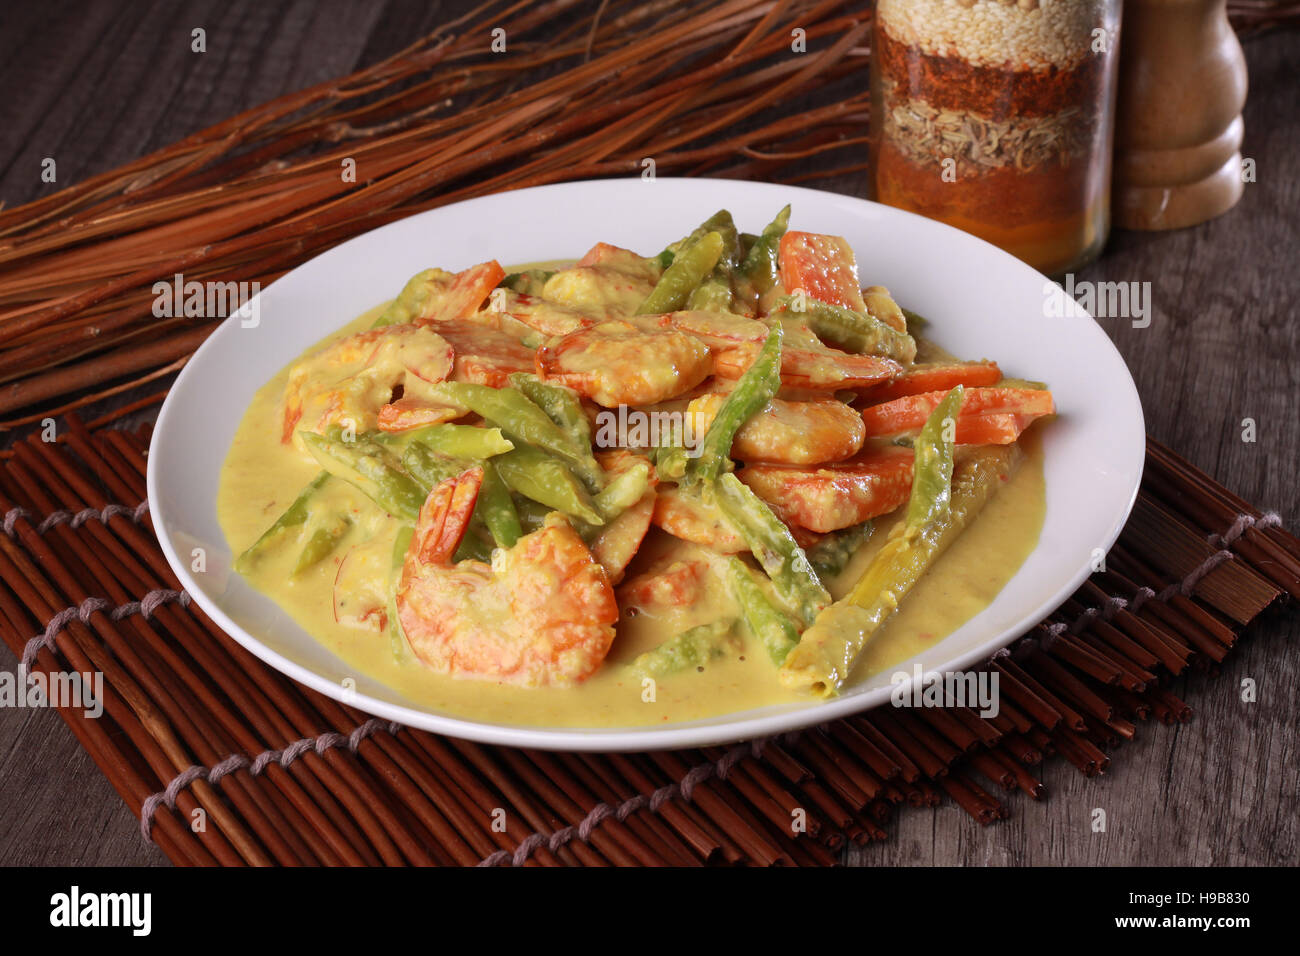 Malaysian prawn in spicy coconut milk gravy on top wooden background Stock Photo